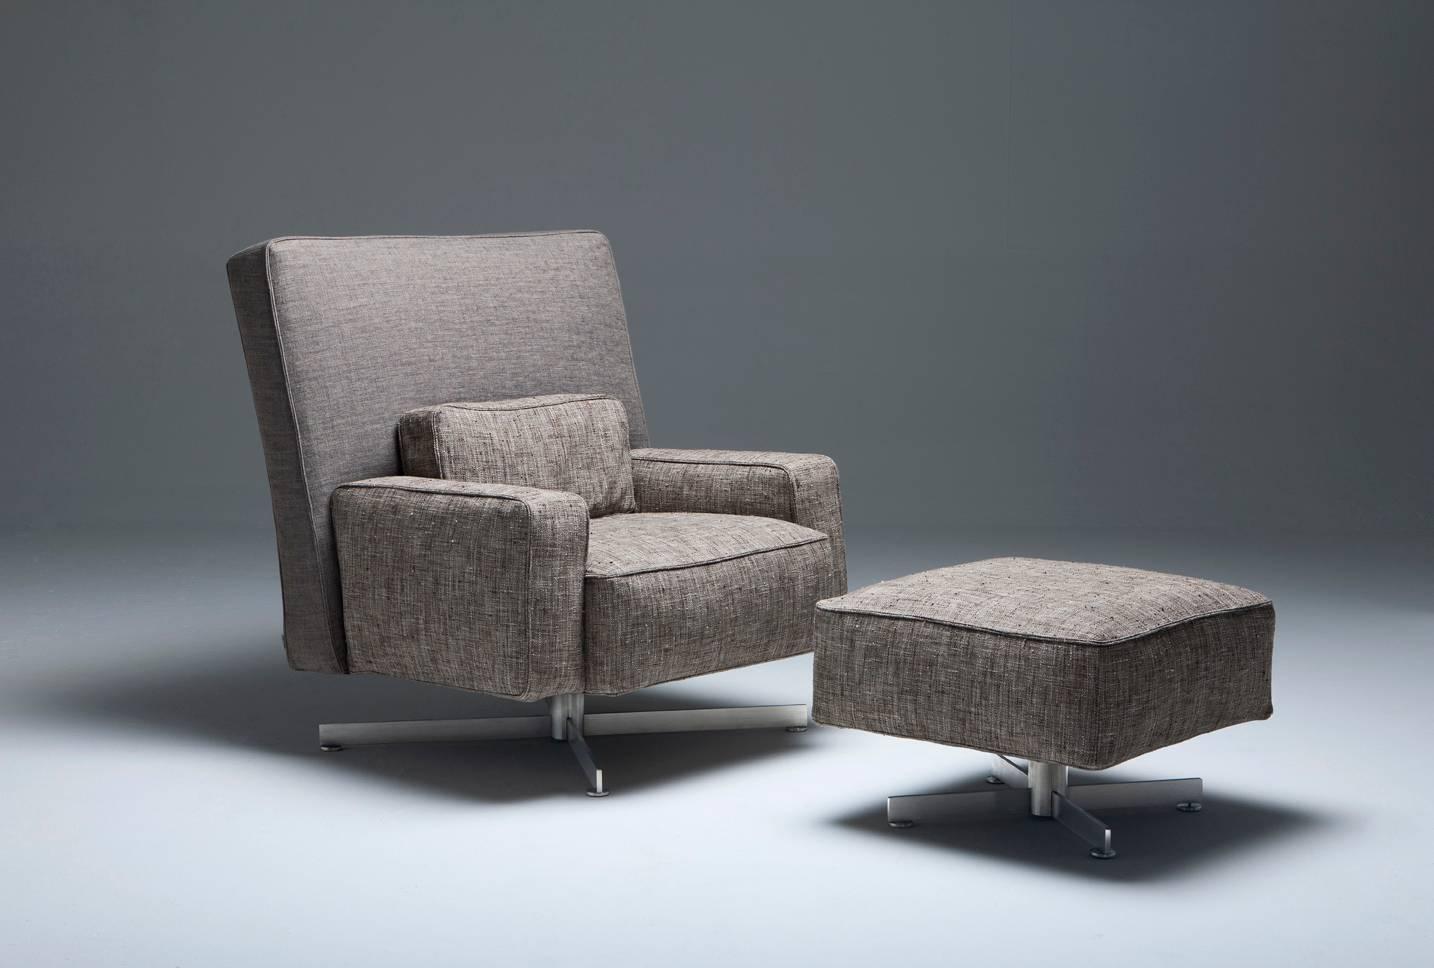 Swivel armchair with rocking mechanisms. Brushed stainless steel base with adjustable feet. Polyurethane foams and goose feather padding. Fabric removable and leather fixed cover. It is possible to order the armchair with back and seat made in